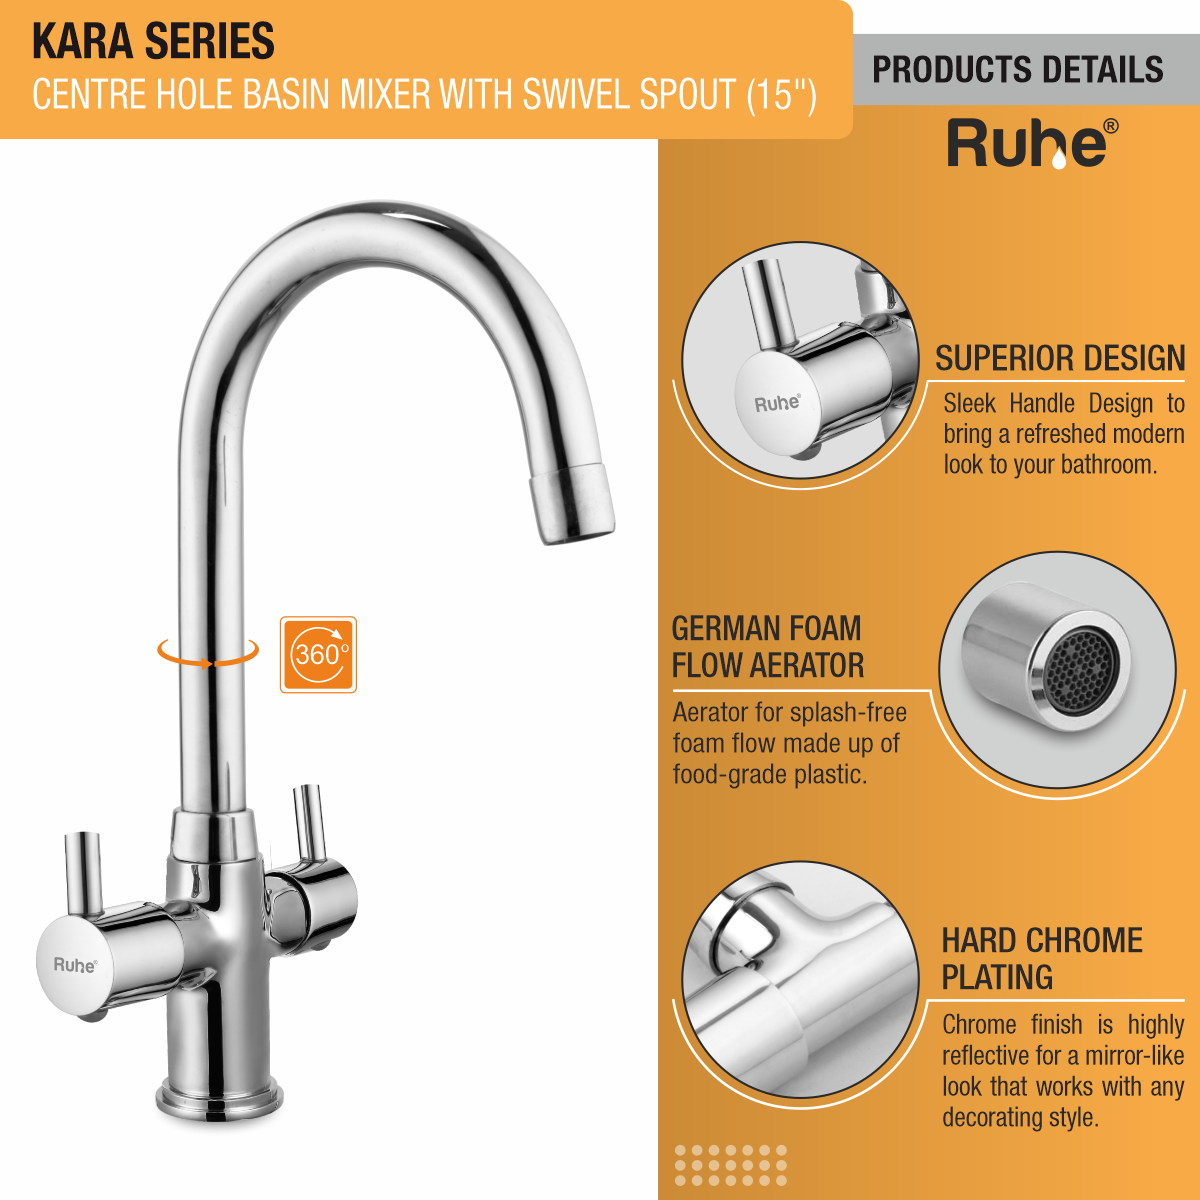 Kara Centre Hole Basin Mixer with Medium (15 inches) Round Swivel Spout Faucet product details